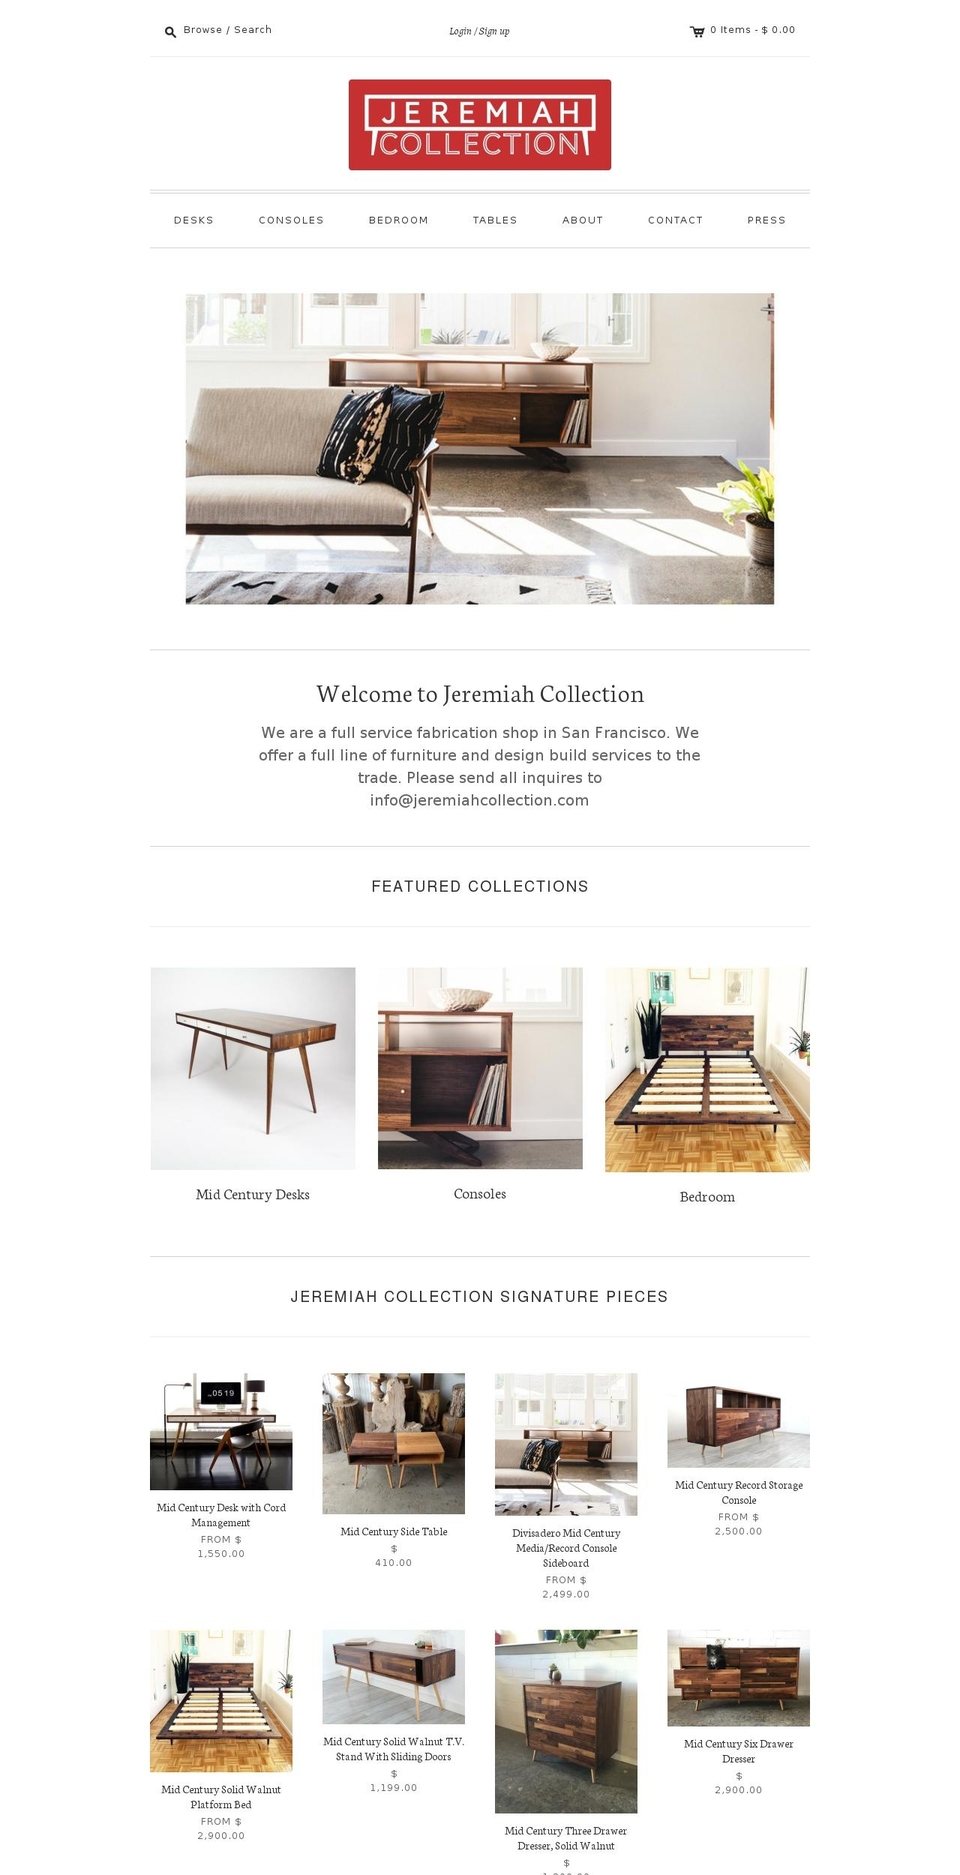 jeremiahcollection.com shopify website screenshot